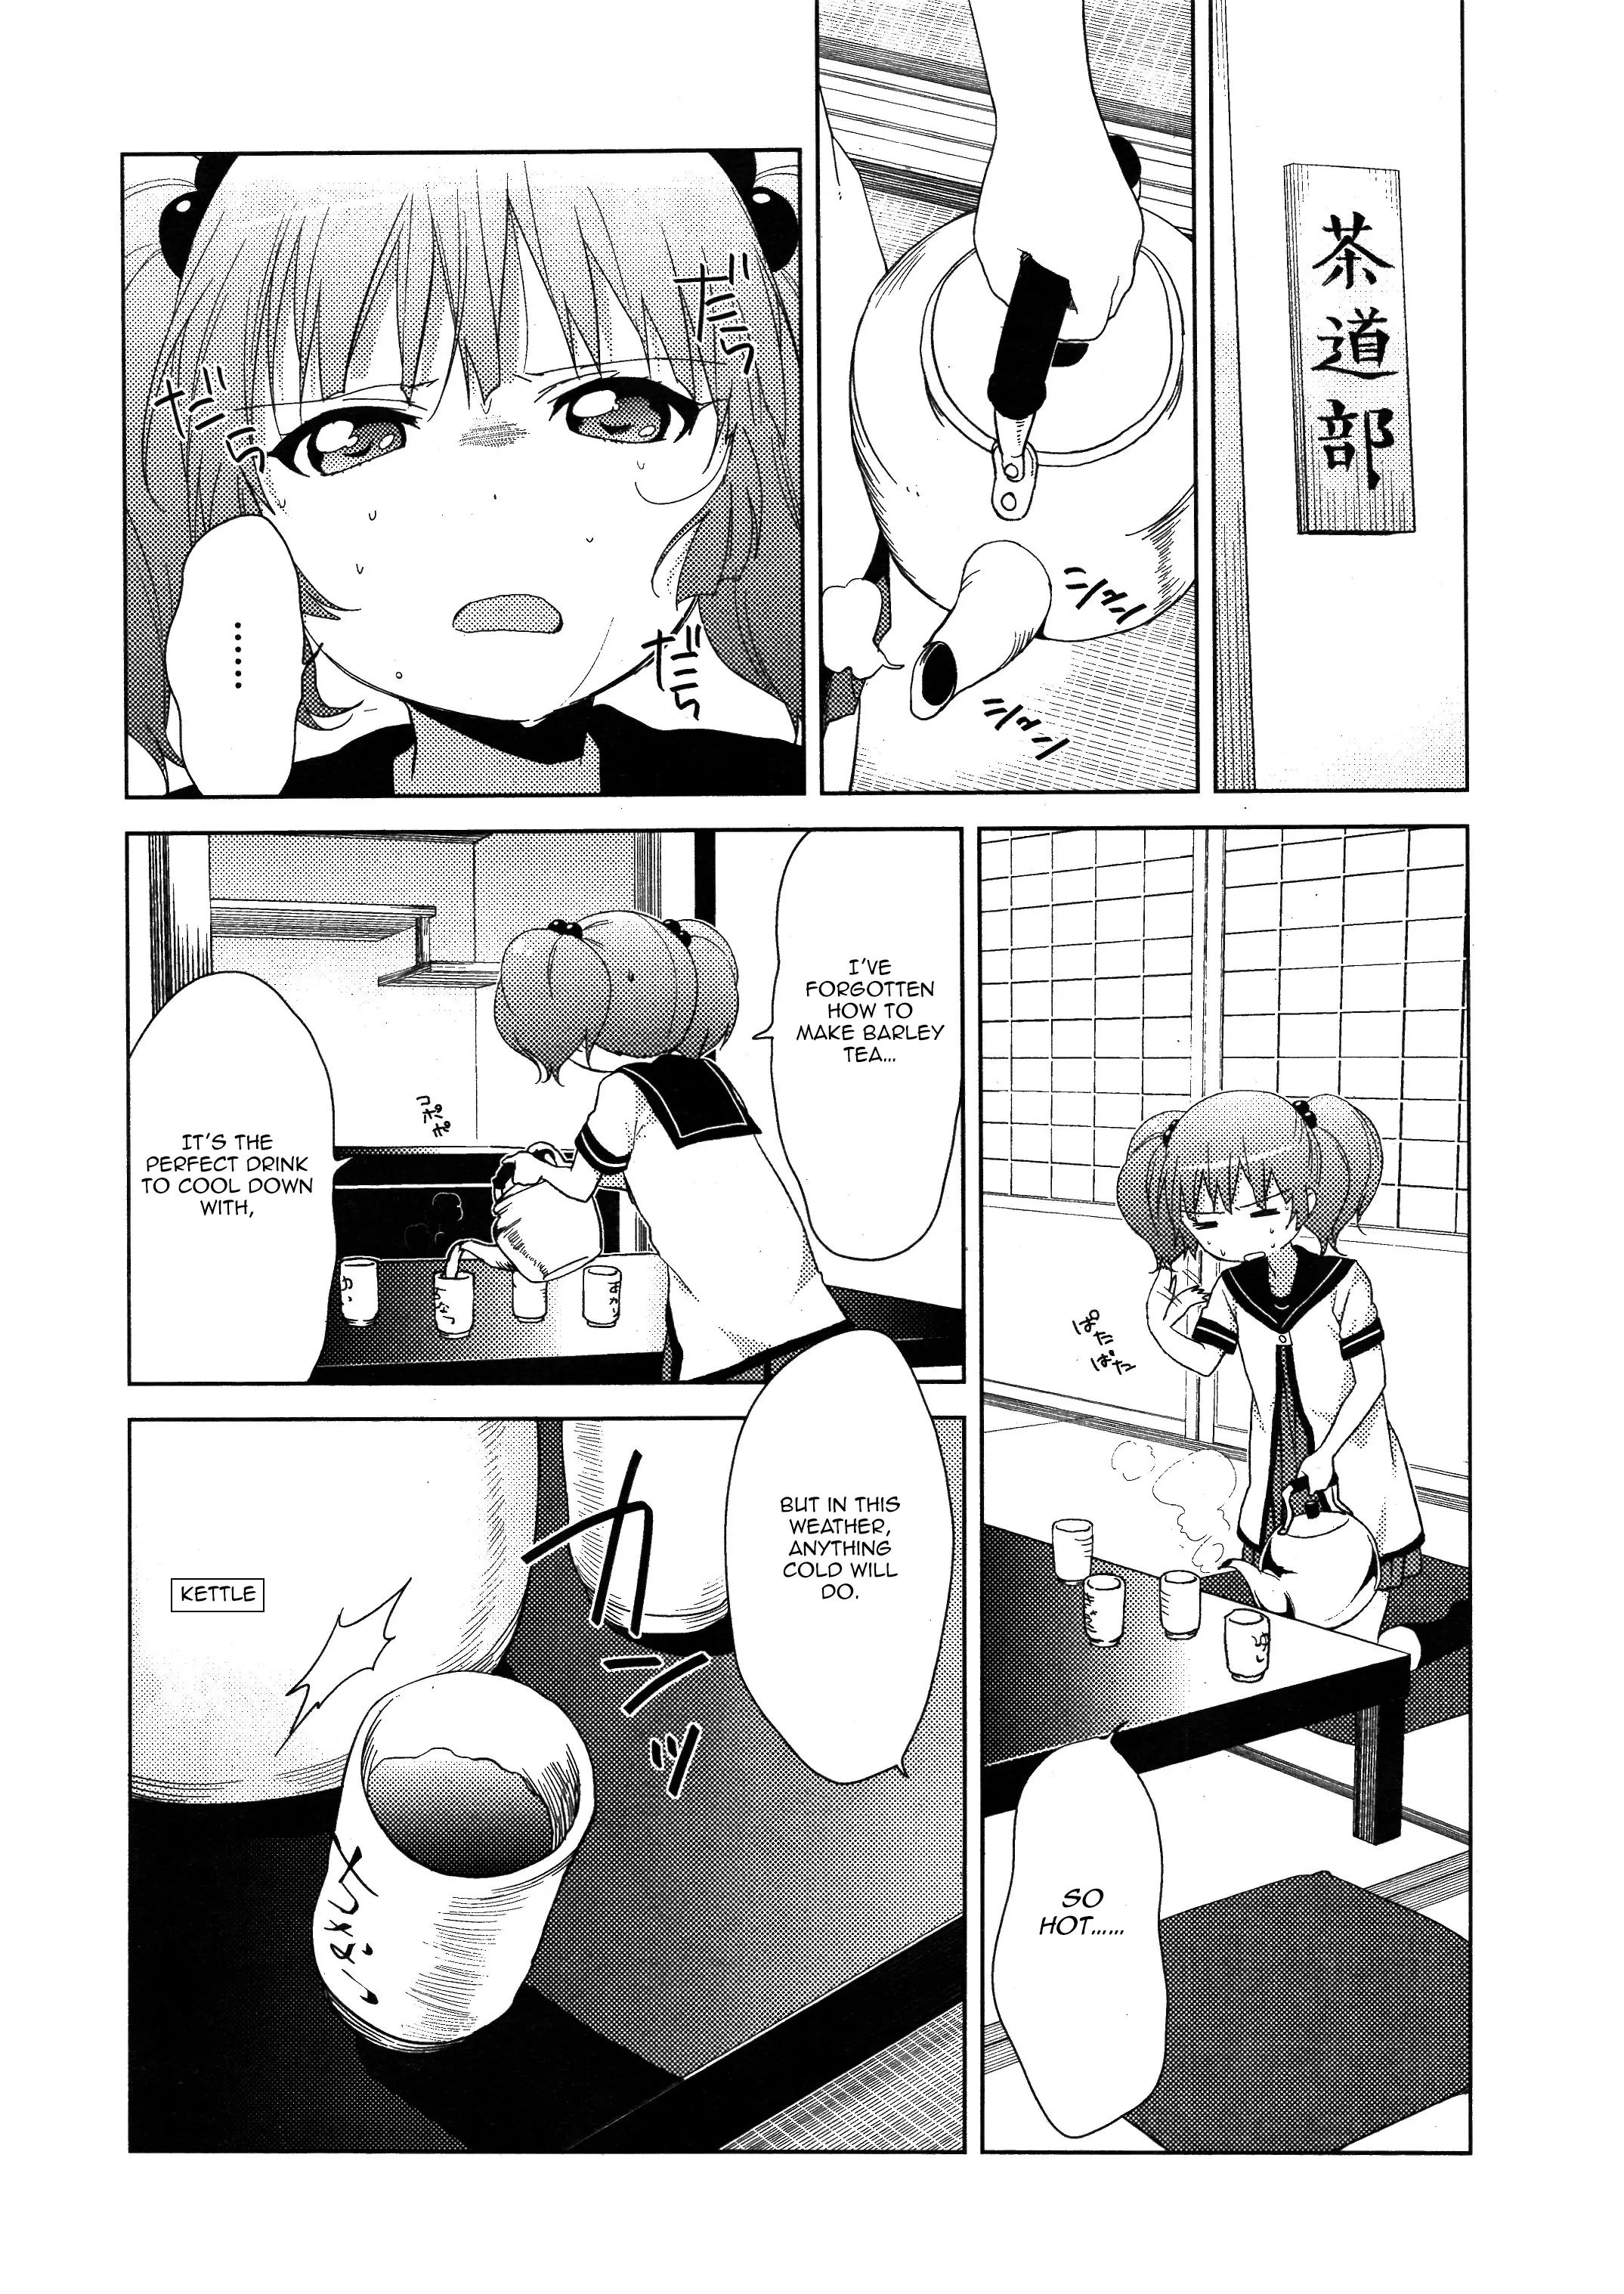 Yuru Yuri Vol.10 Chapter 62: It's Not What You Think! - Picture 2